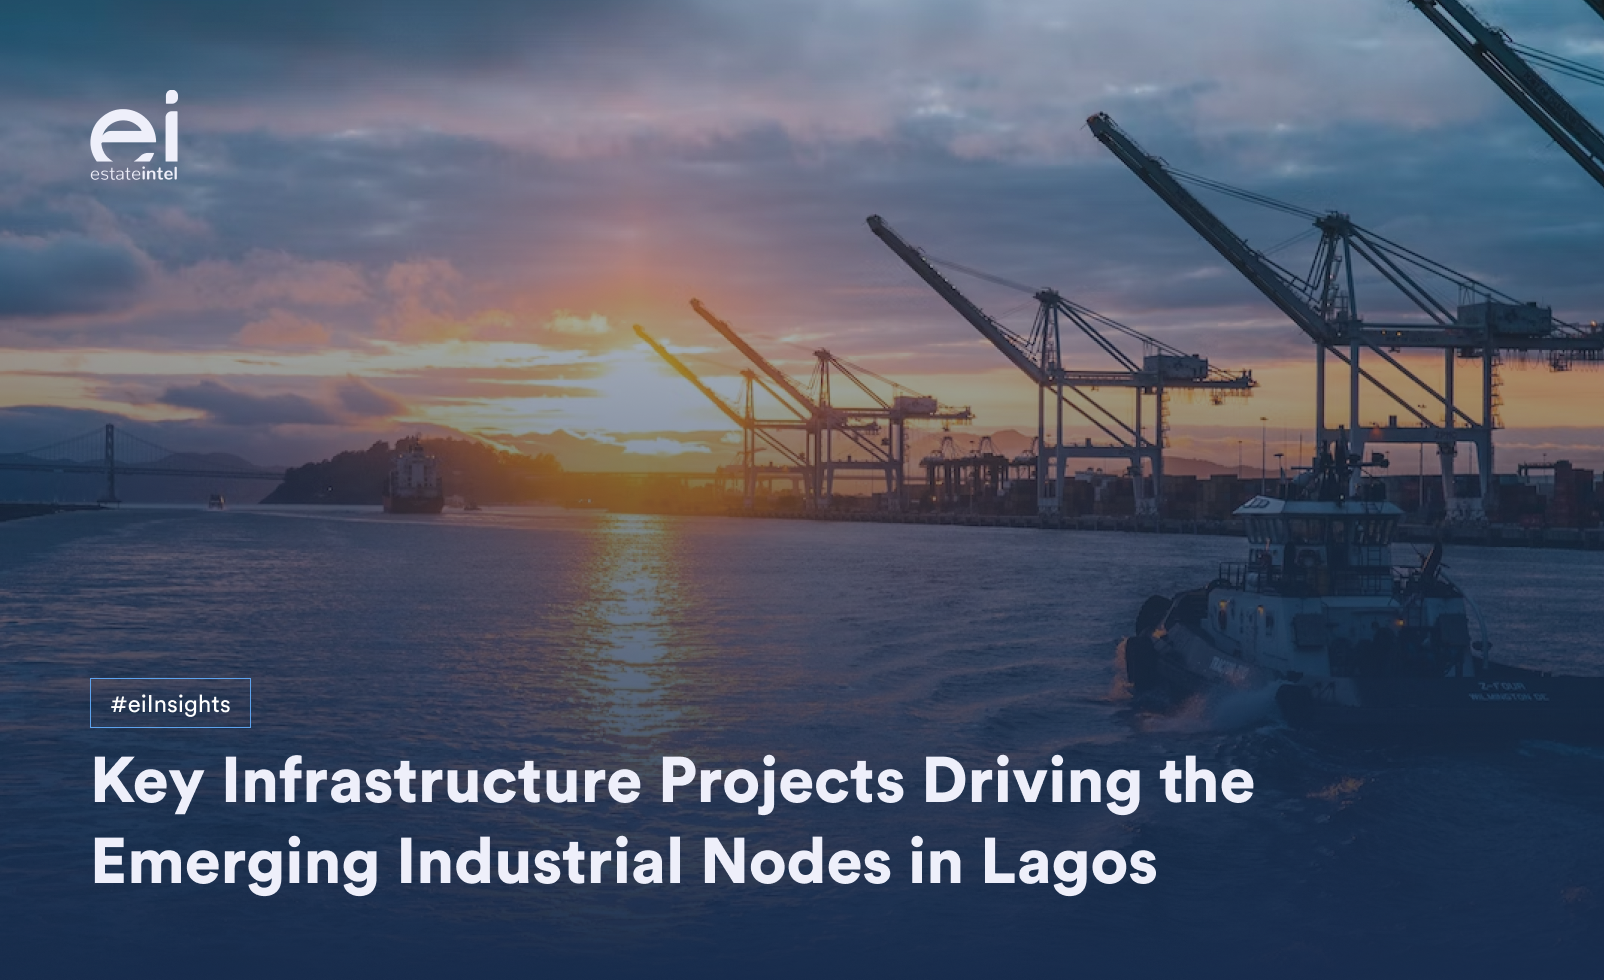 Key Infrastructure Projects Driving the Emerging Industrial Nodes in Lagos